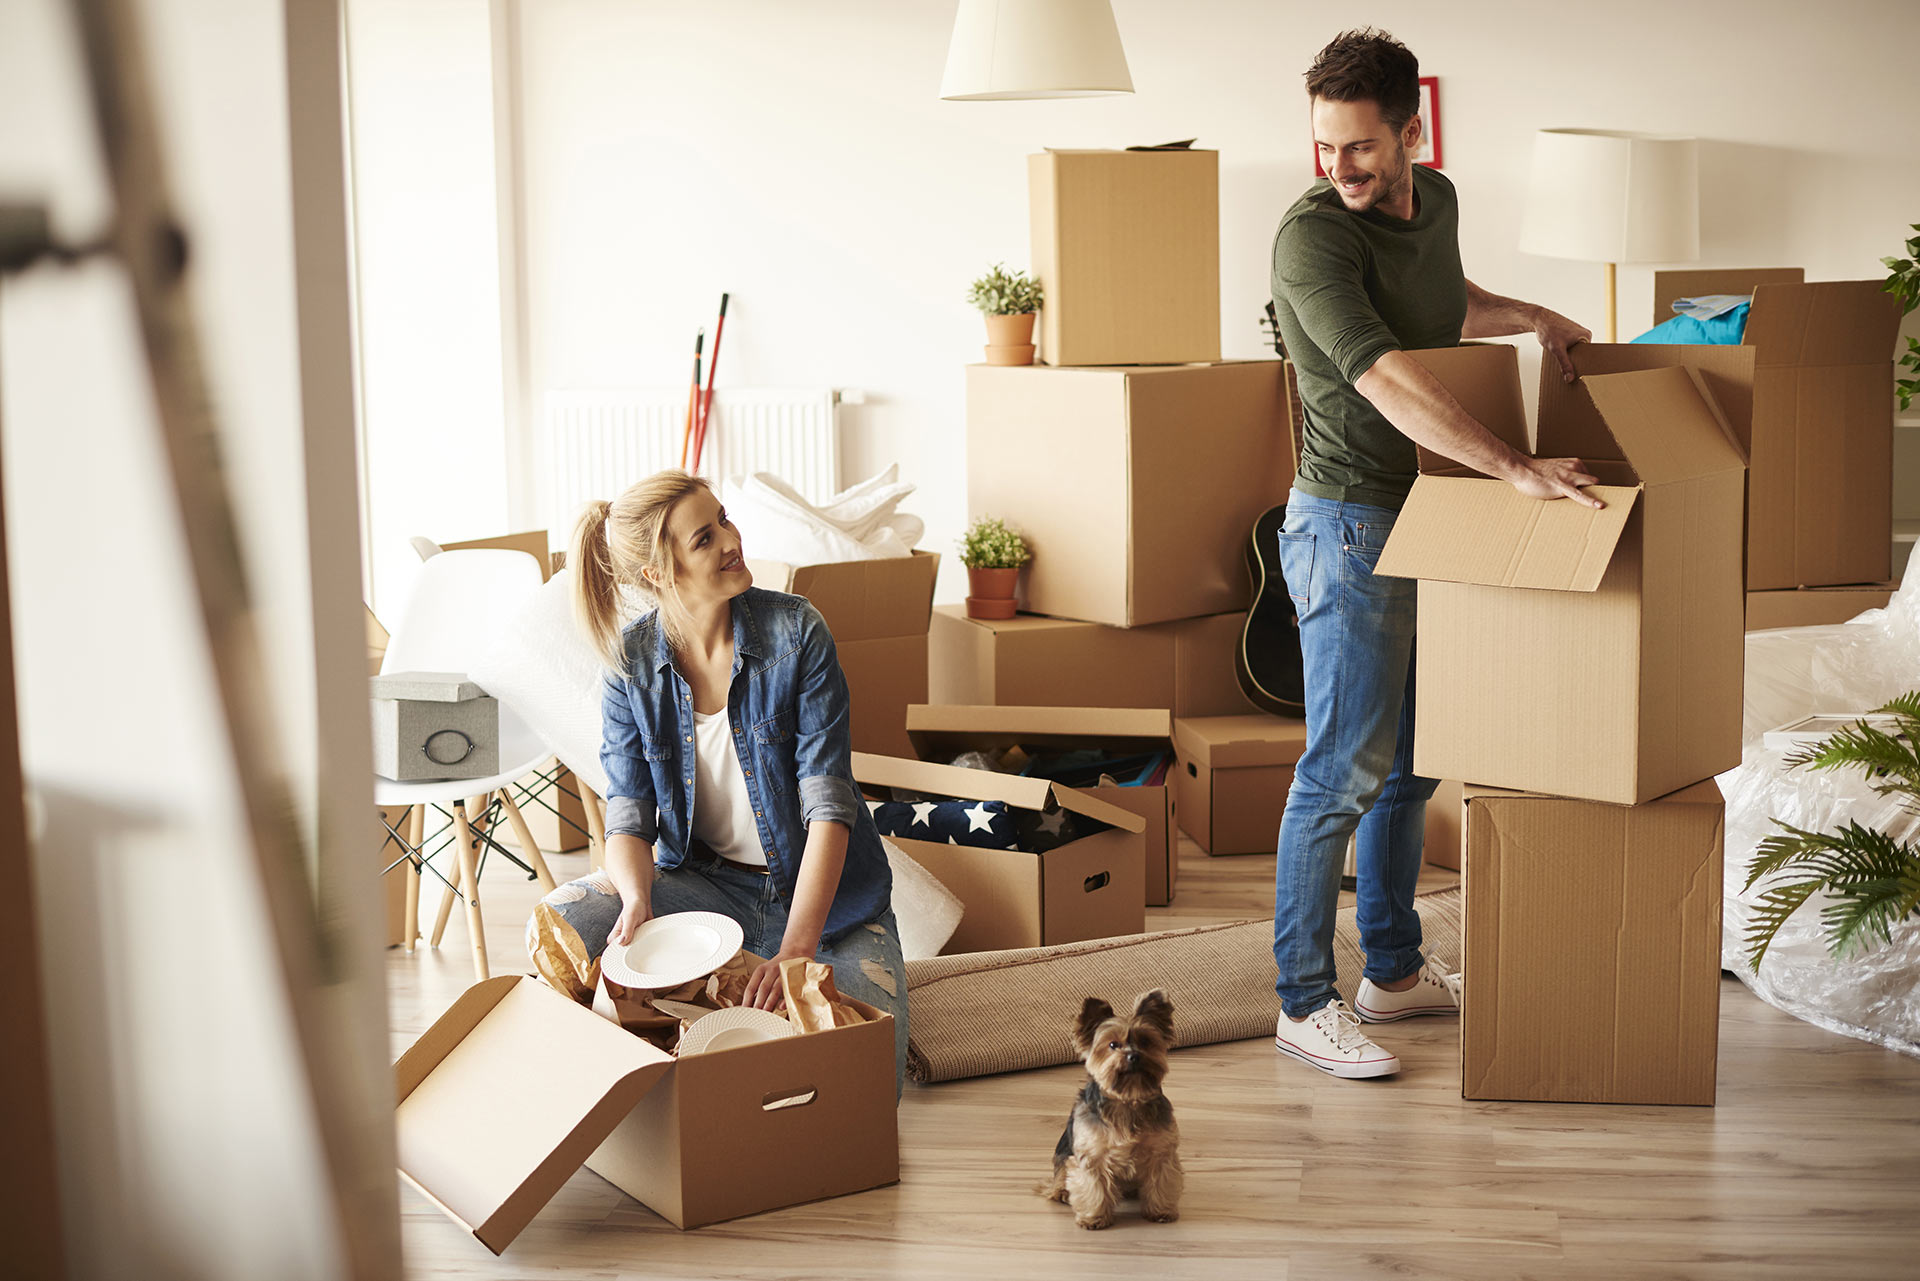 Home essentials: what to buy when moving into a new place? - Online store Smart Furniture Mississauga